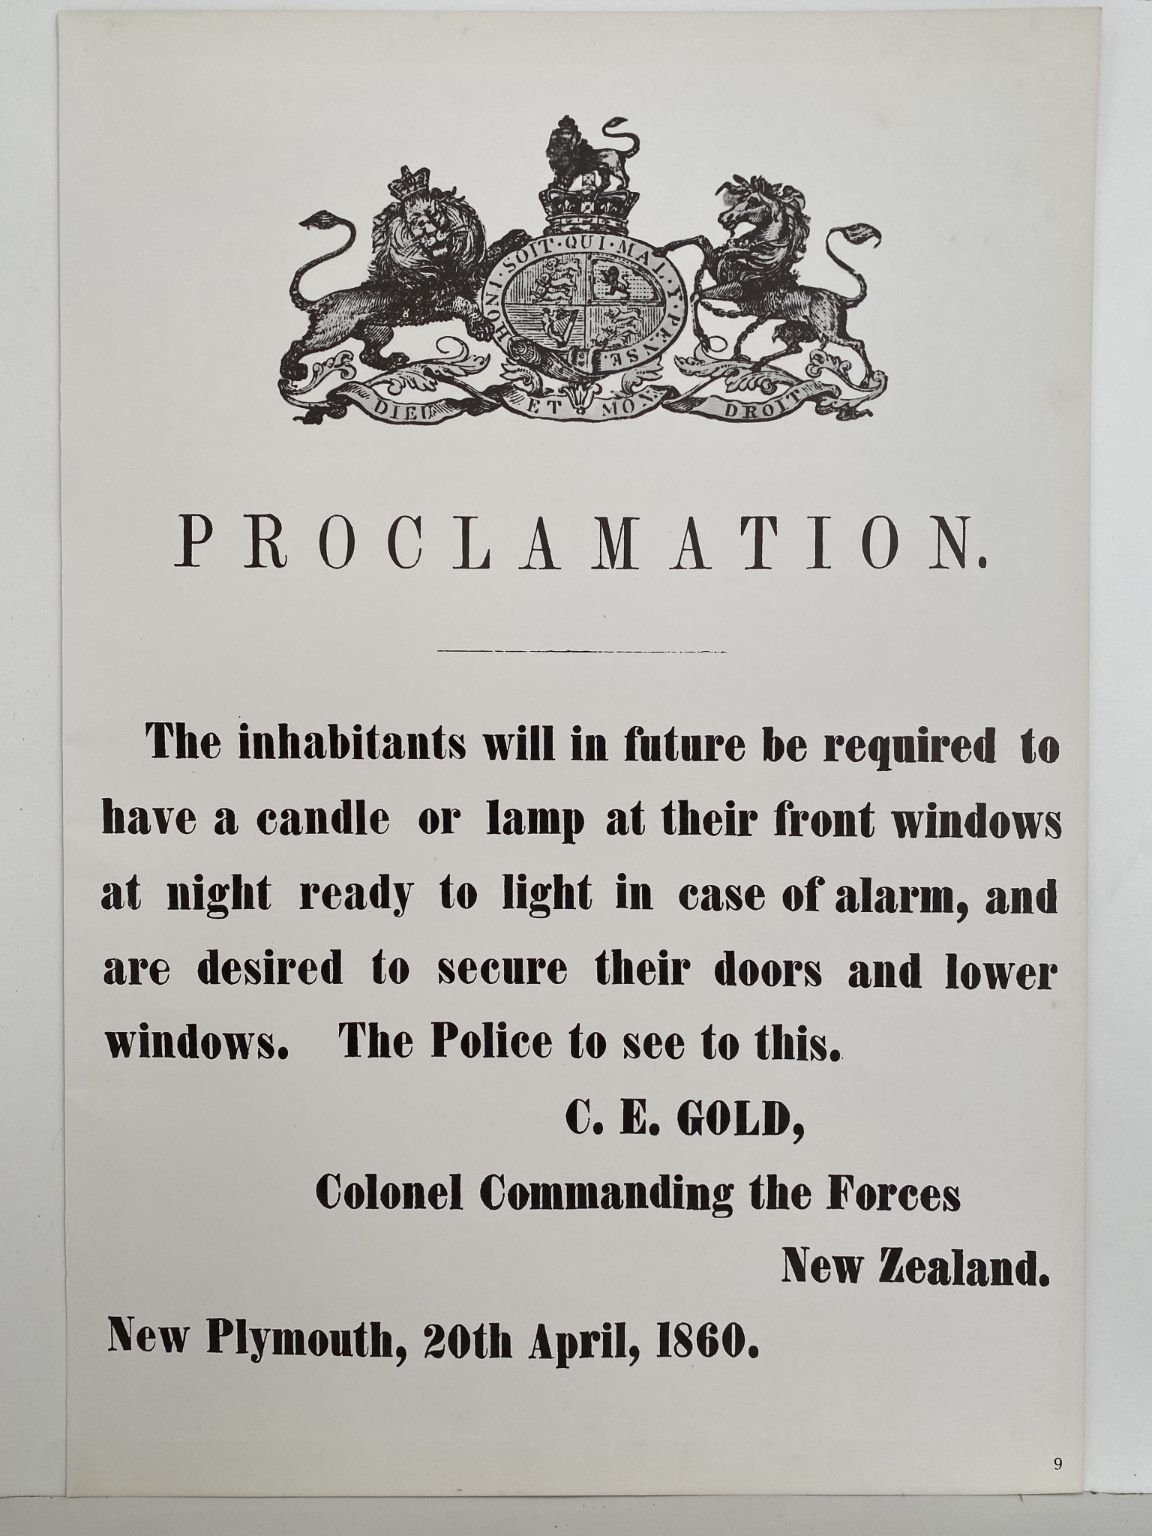 VINTAGE POSTER: New Zealand Advertising 1860